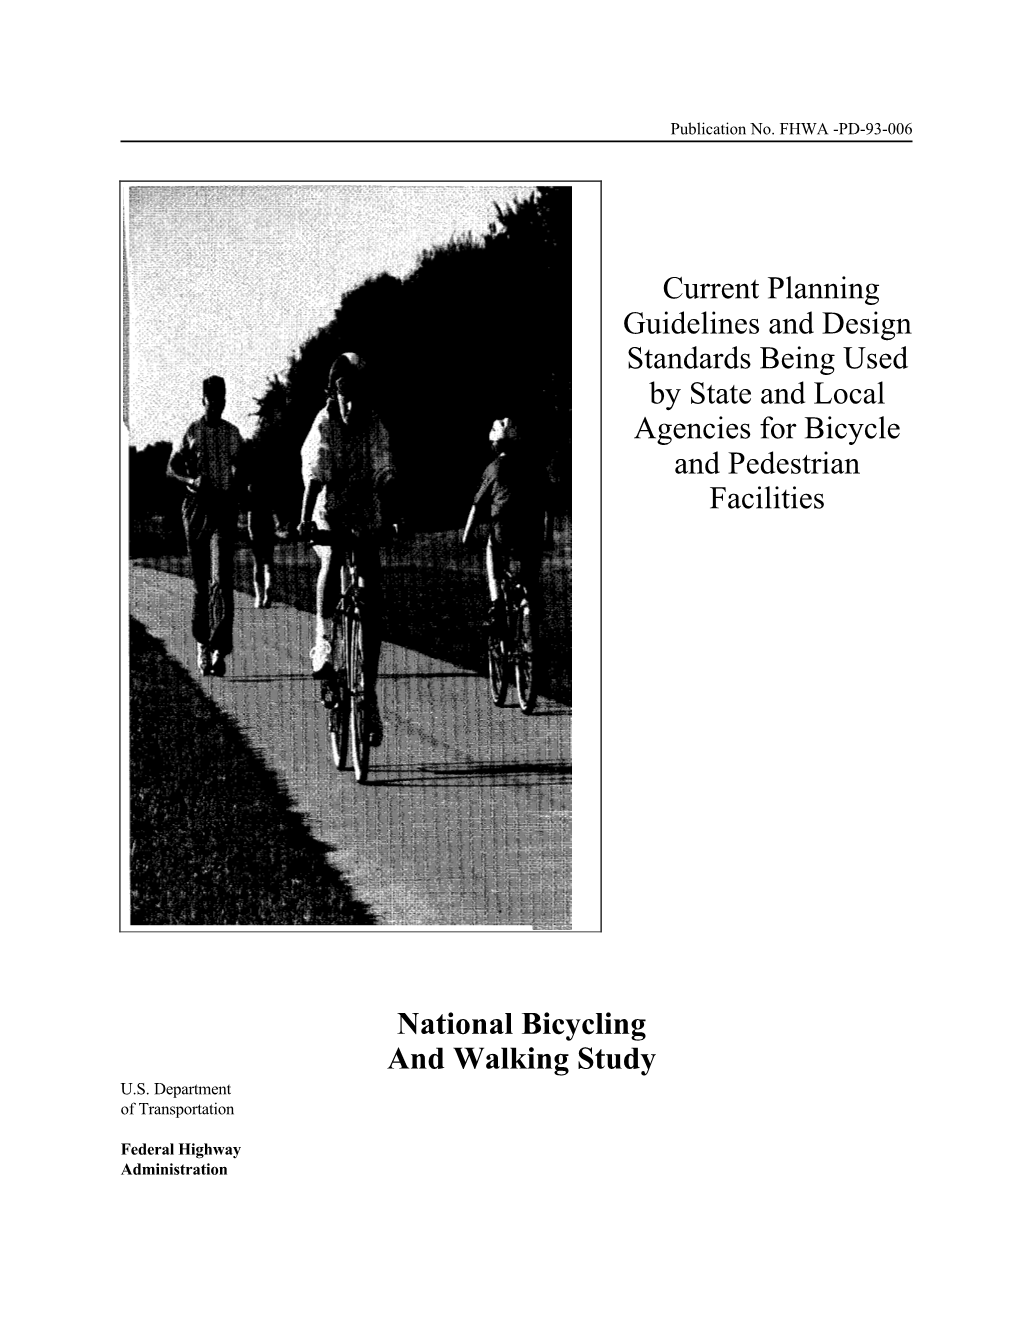 Current Planning Guidelines and Design Standards Being Used by State and Local Agencies for Bicycle and Pedestrian Facilities Na